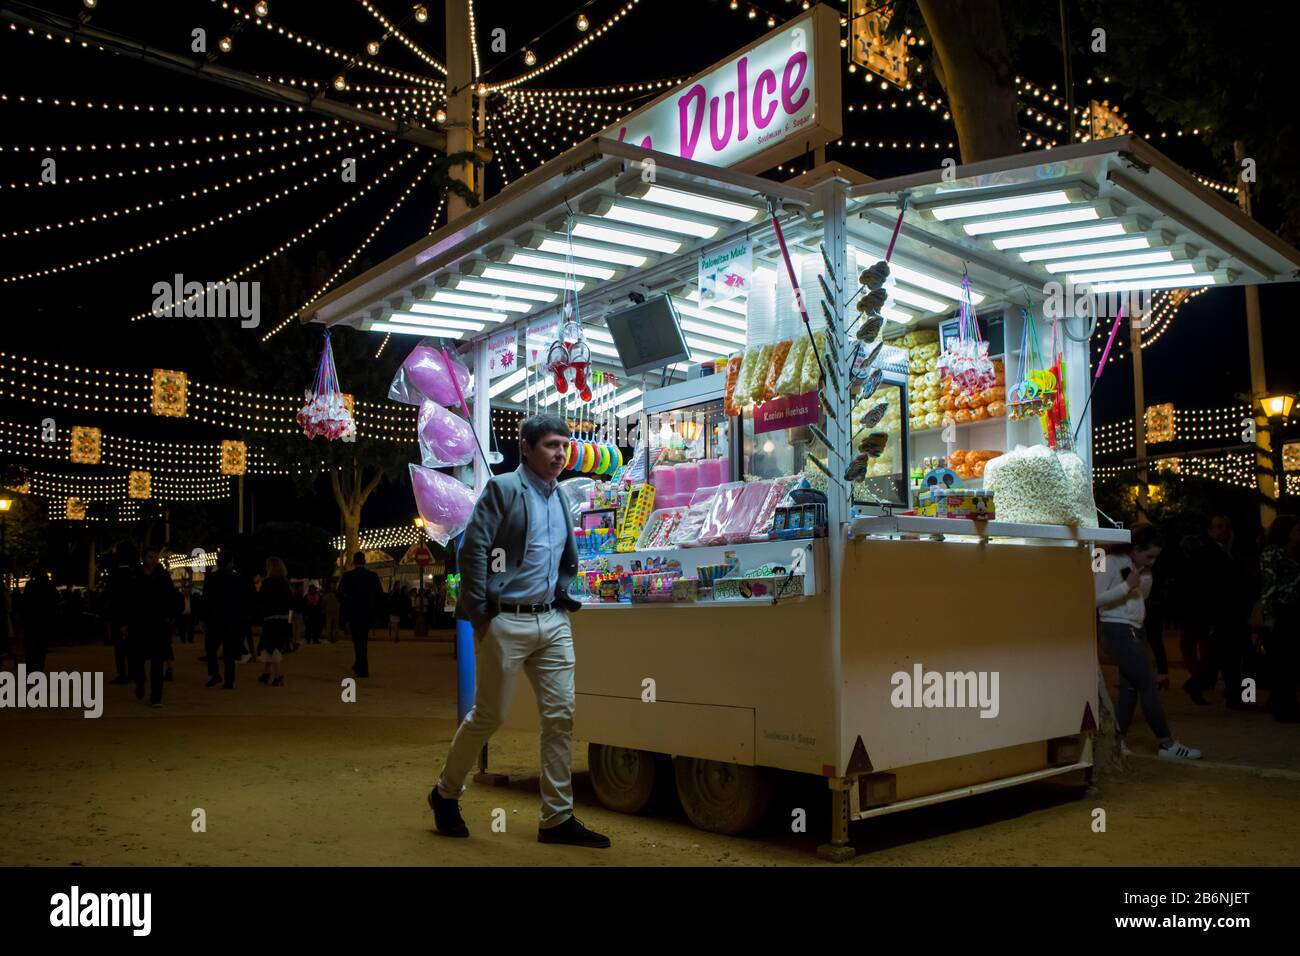 Night shot of a man walking close to a sweeties kiosk at the Feria de Abril enclosure, Seville, Spain Stock Photo